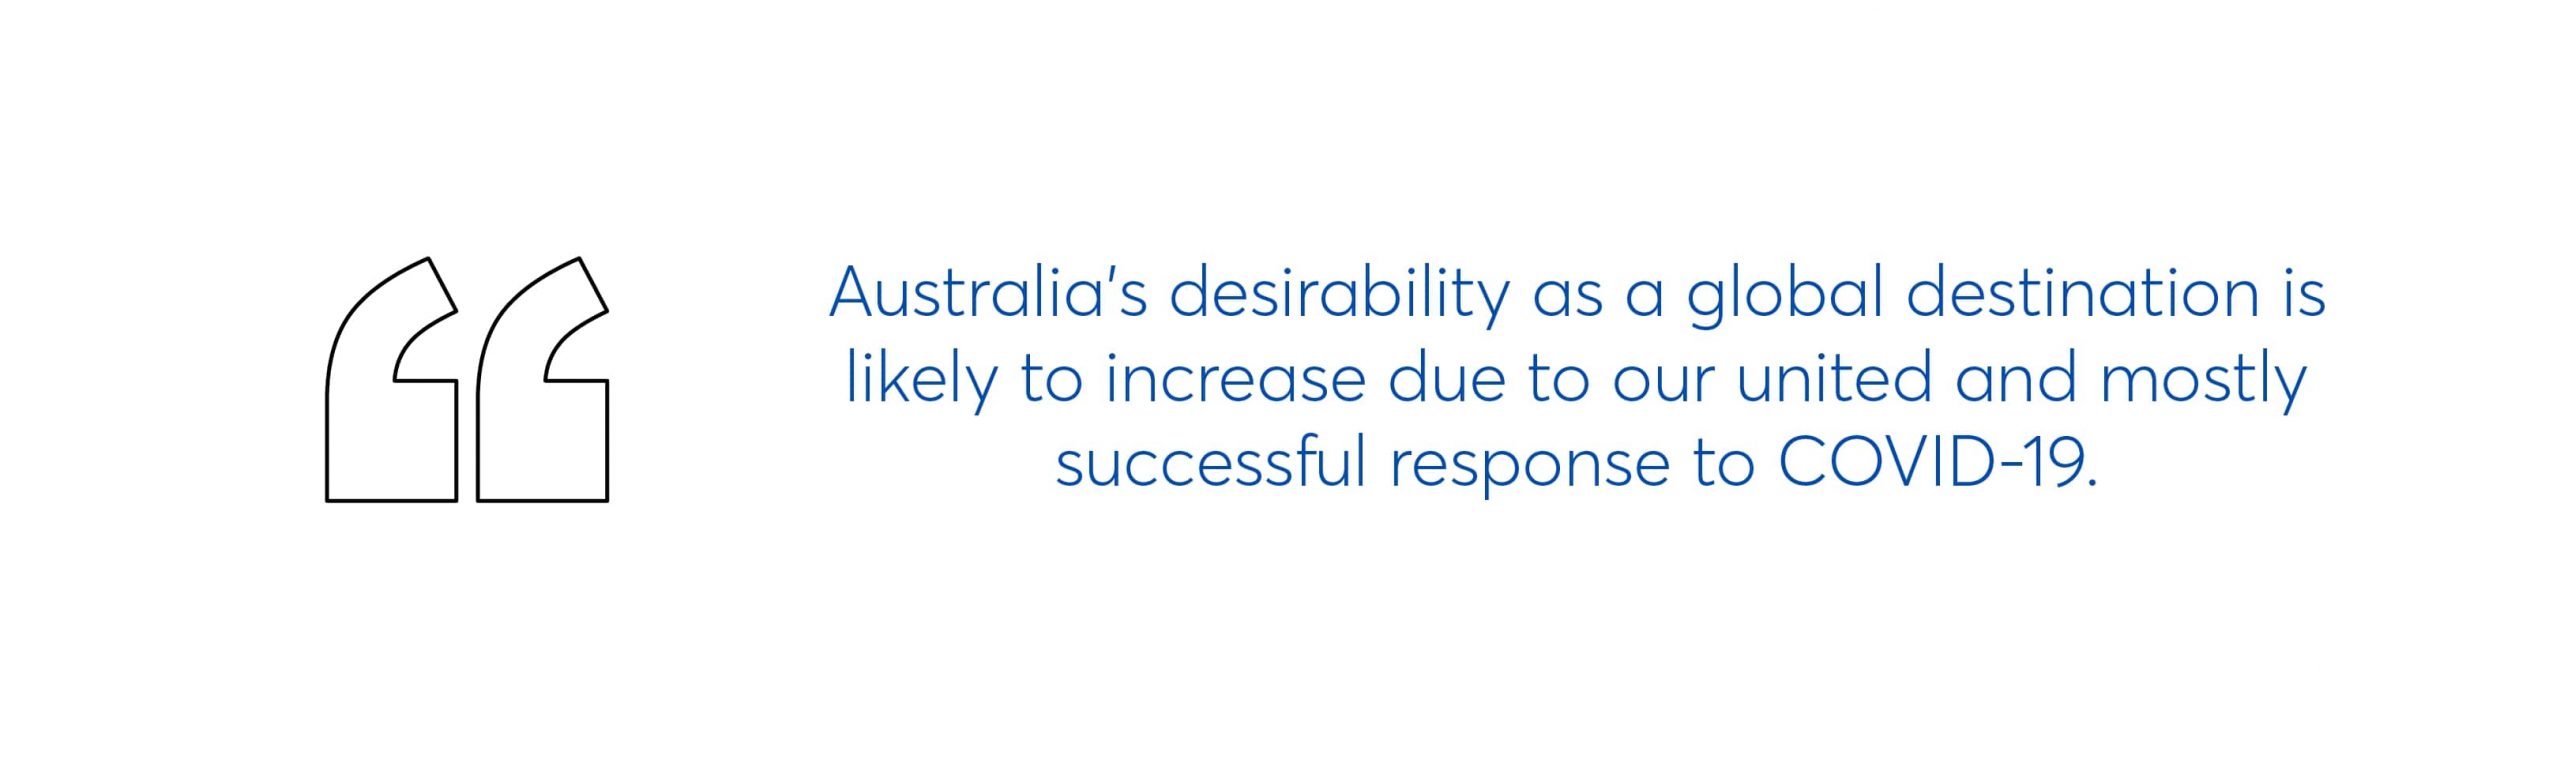 text graphic which reads australia's desirability as a global destination is likely to increase due to our united and mostly successful response to COVID-19.